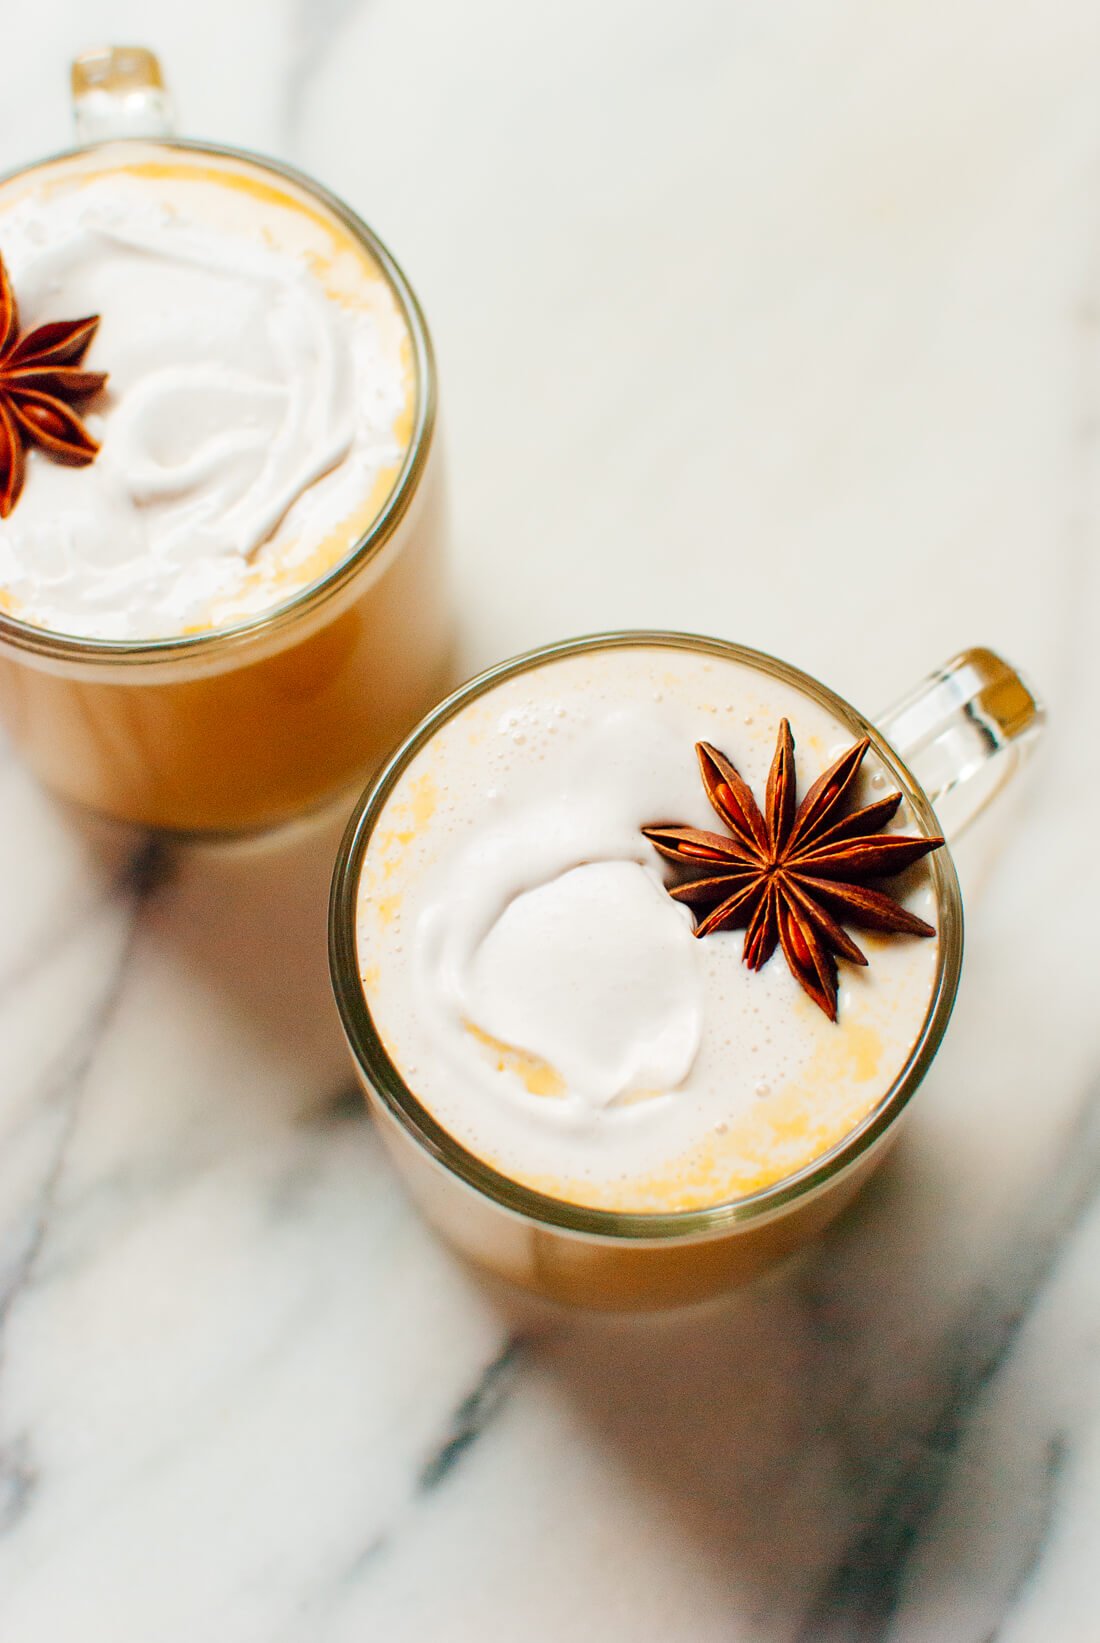 Creamy pumpkin spice chai lattes made with real ingredients (only 90 calories!)